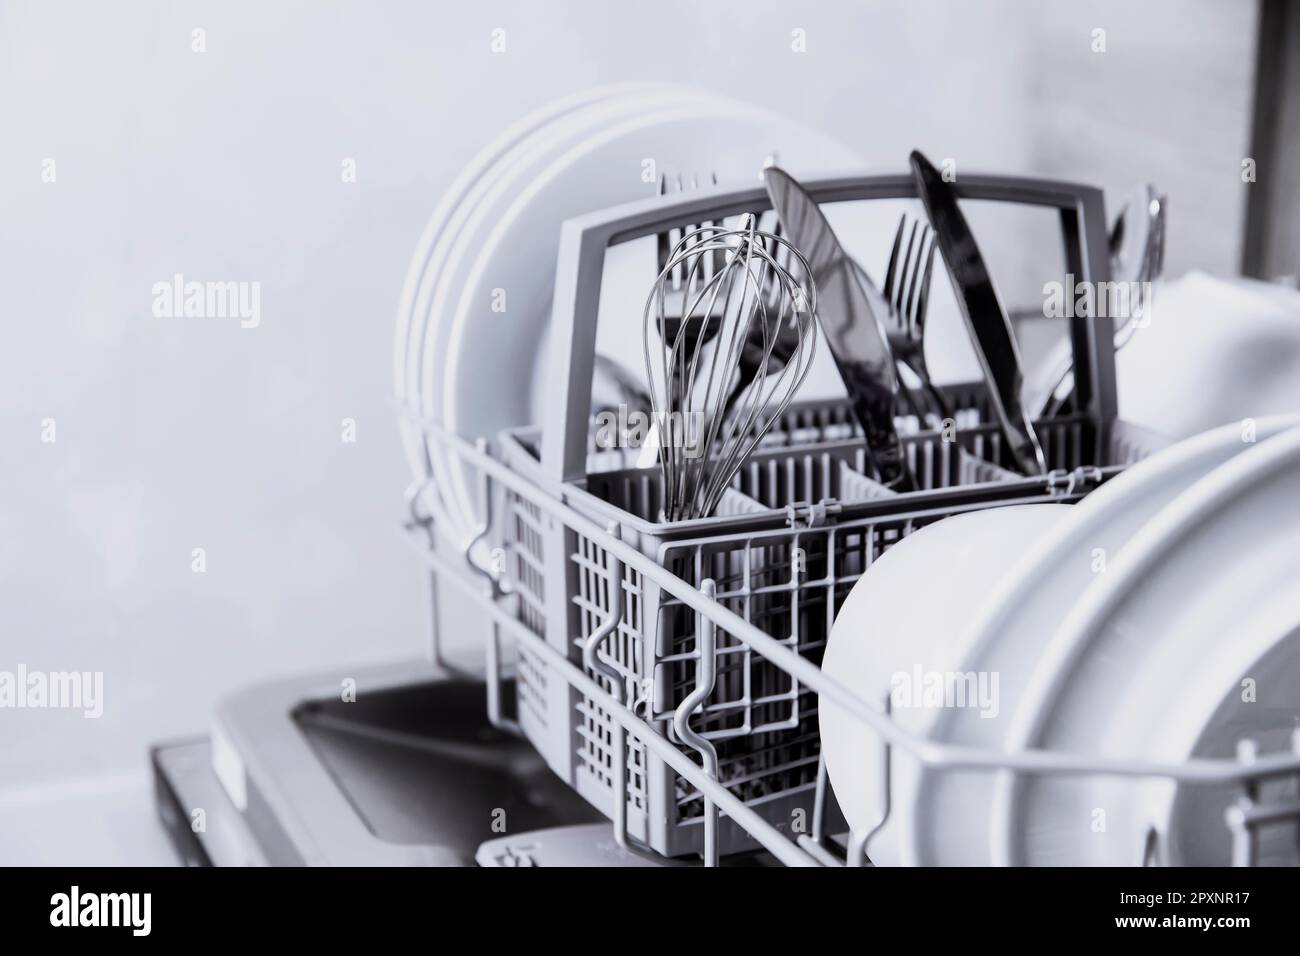 Front view of open automatic stainless steel built-in fully integrated top control dishwasher range machine with clean utensils, cutlery, glasses, dis Stock Photo